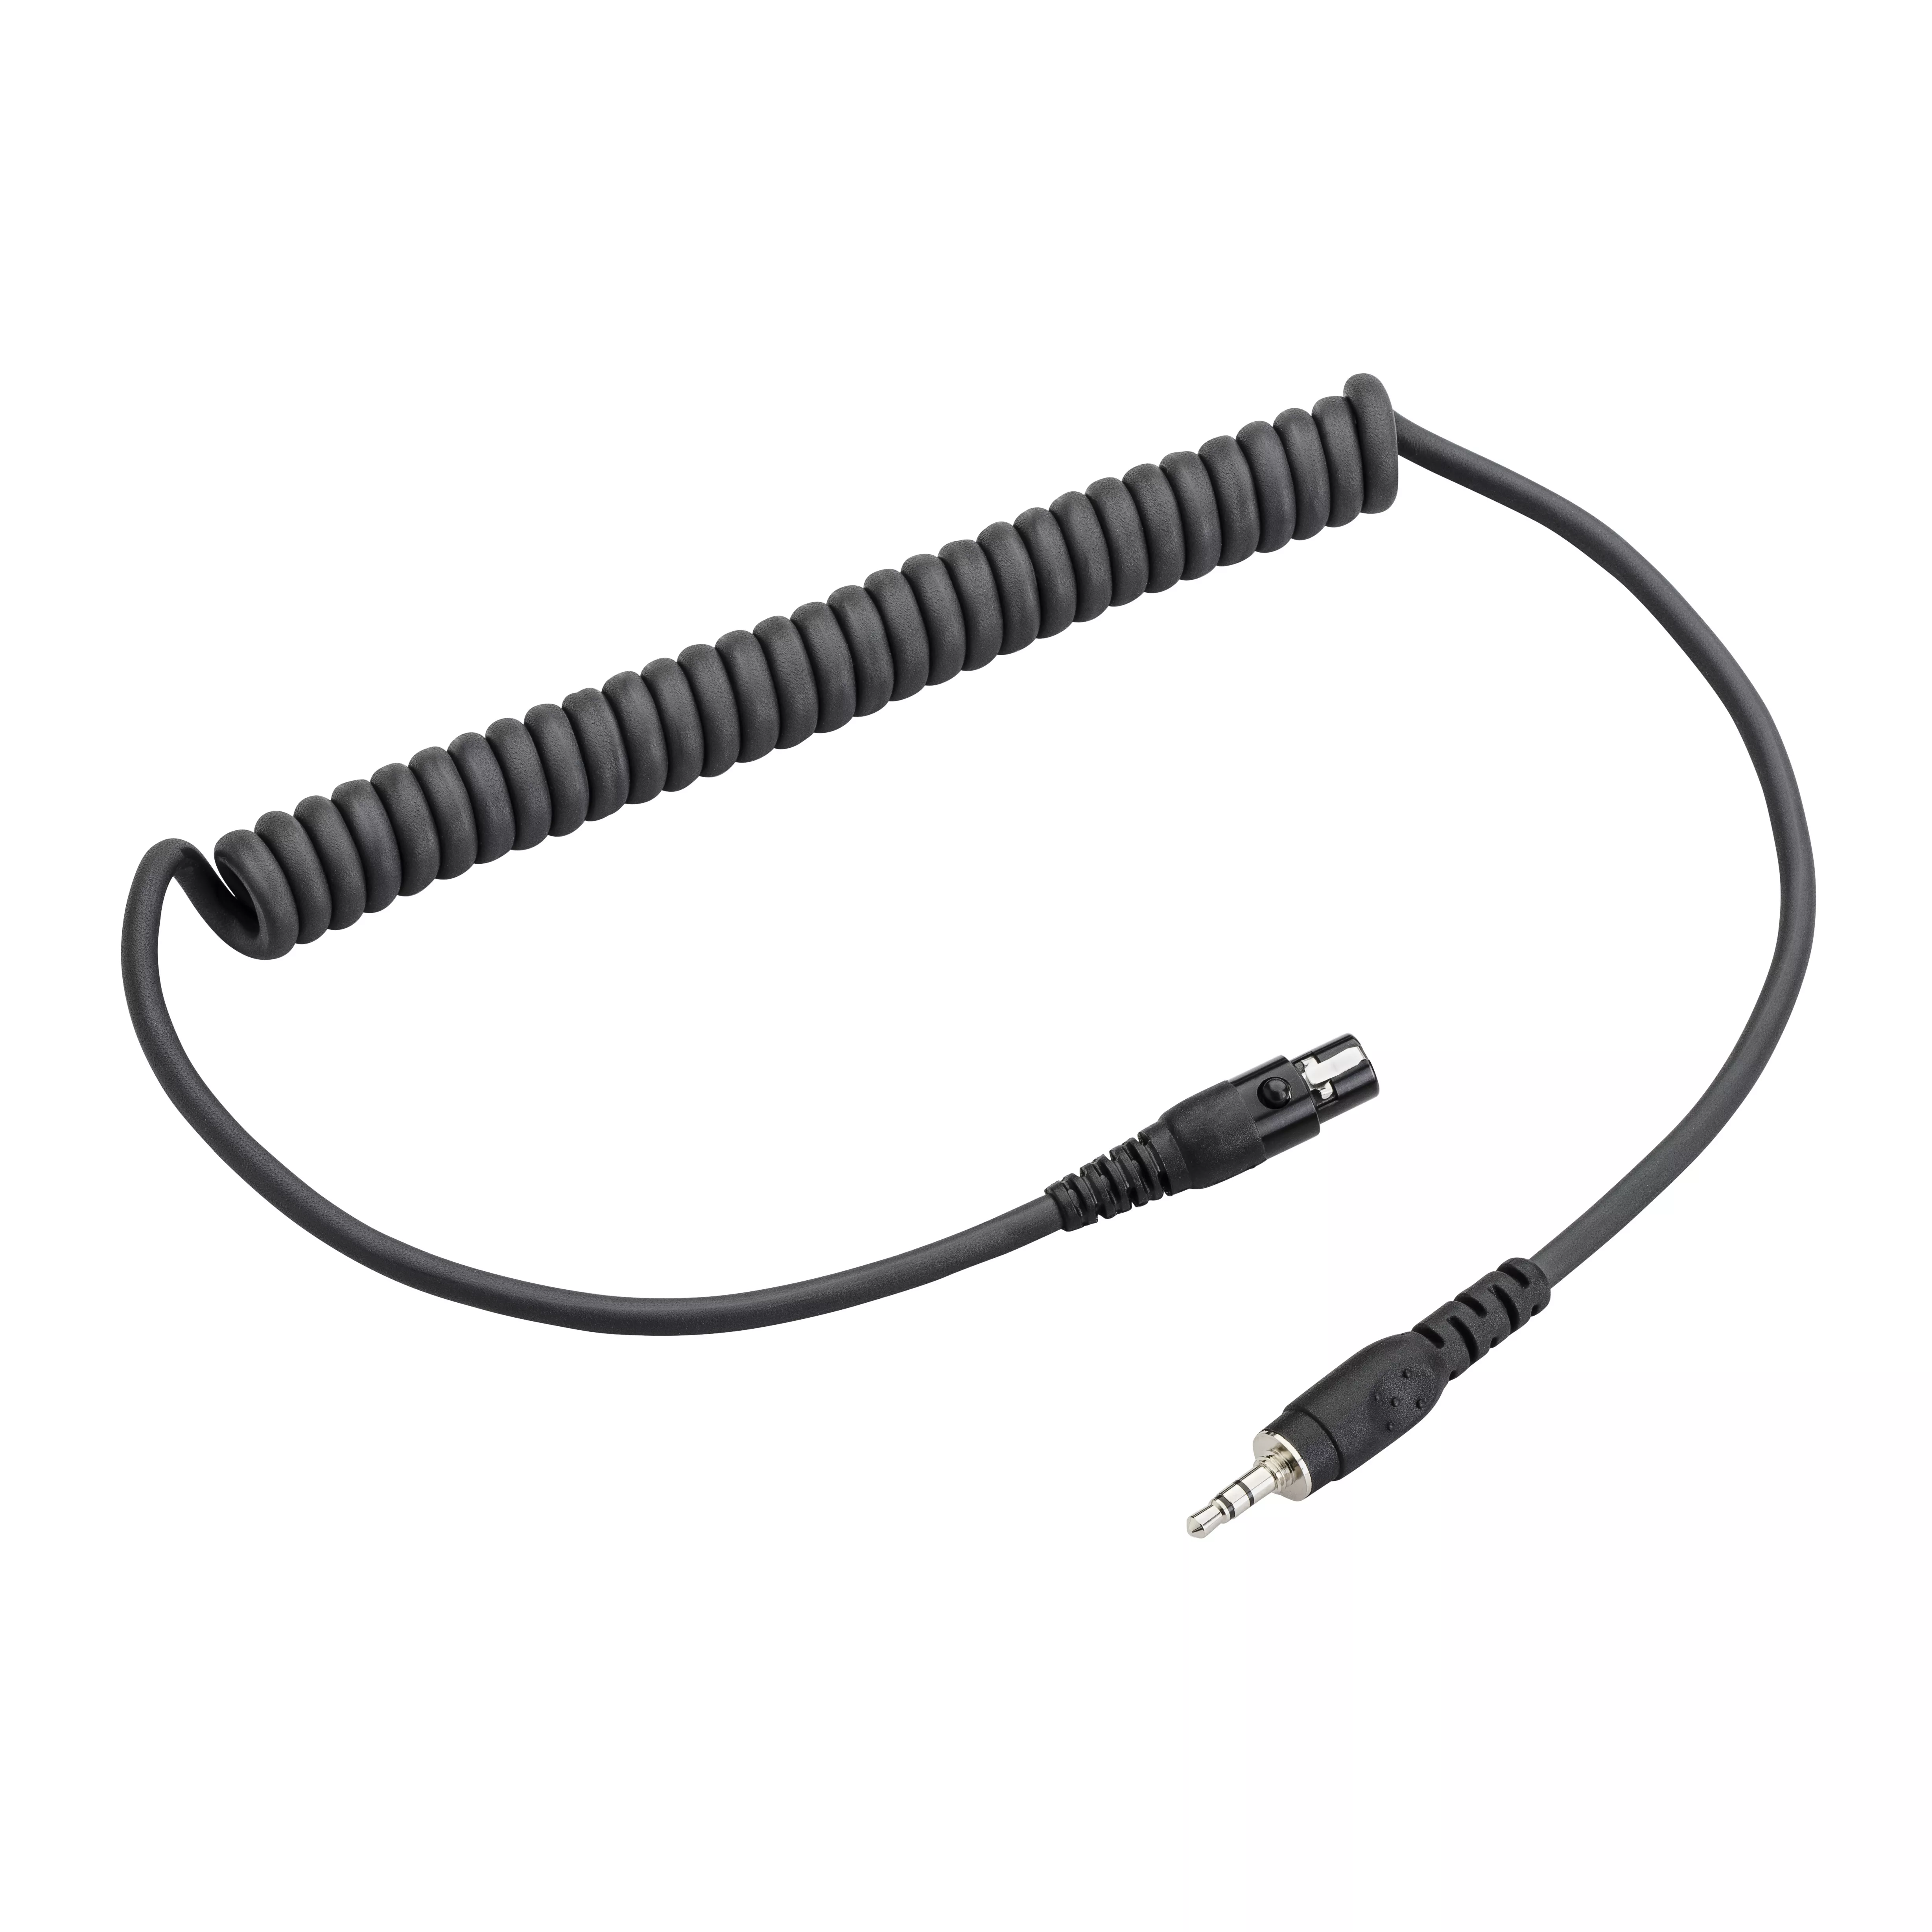 3M™ PELTOR™ FLX2 Cable FLX2-208, 3.5mm Stereo Threaded, 120 ea/Case